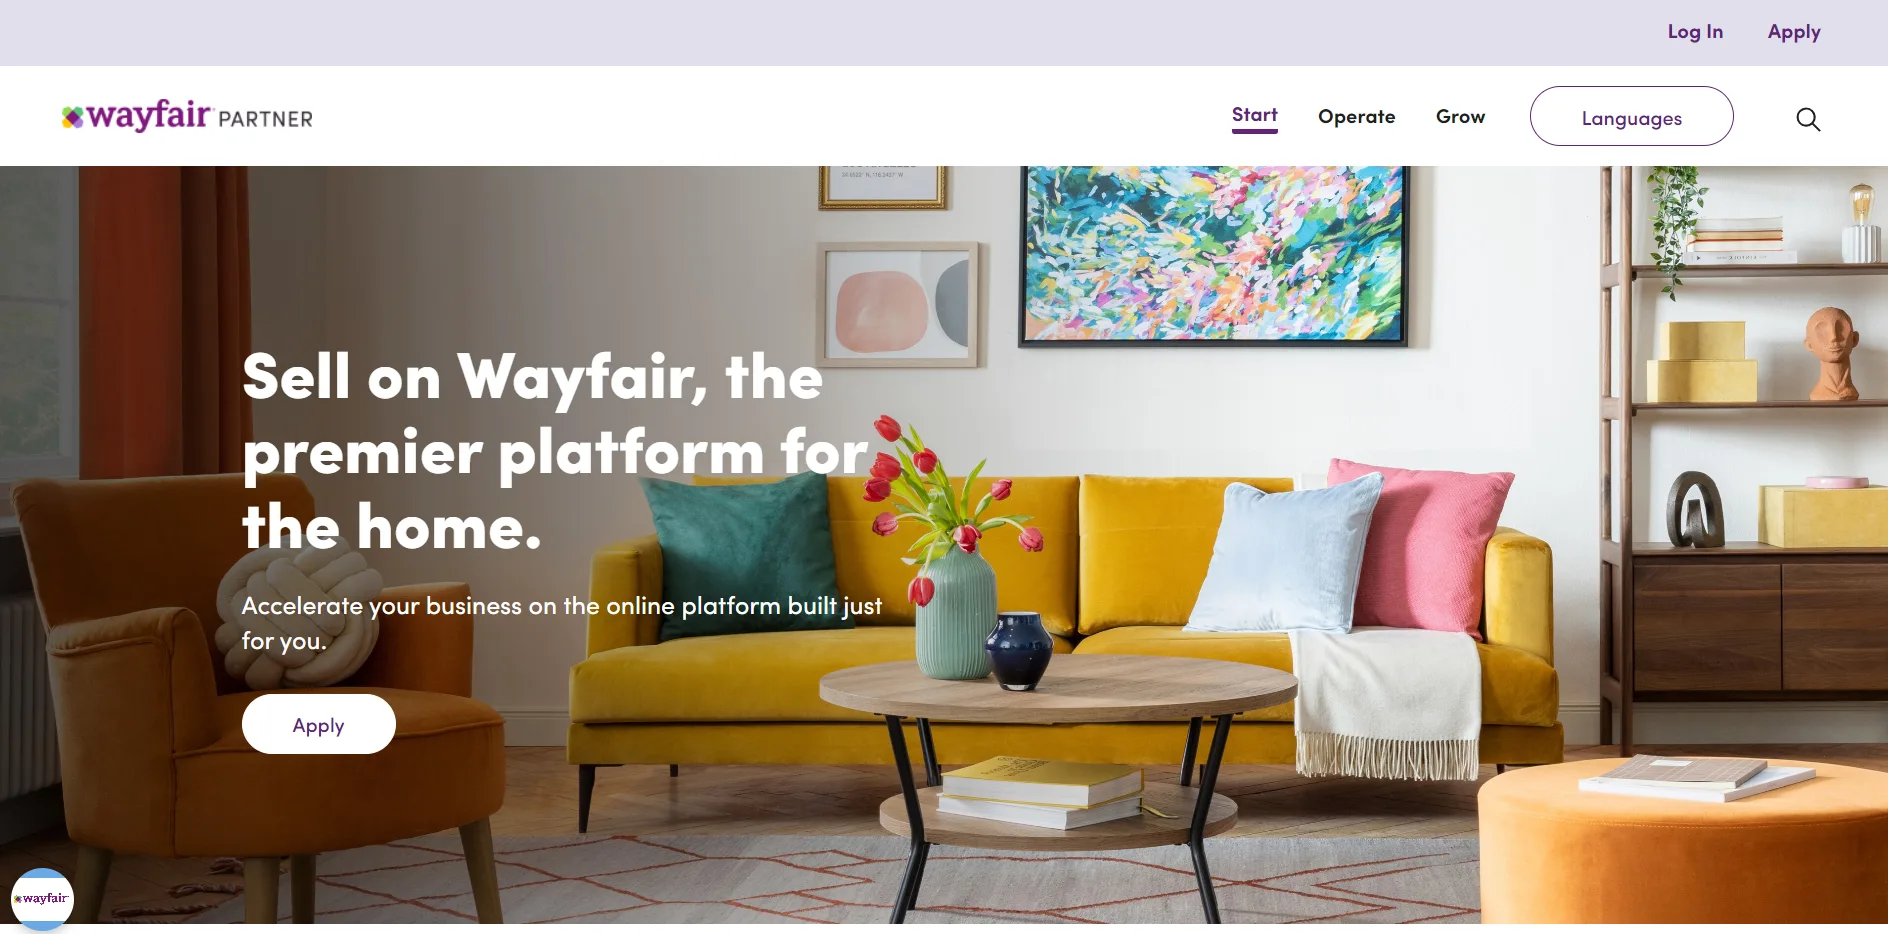 Consider Dropshipping from a Reliable Supplier on Wayfair